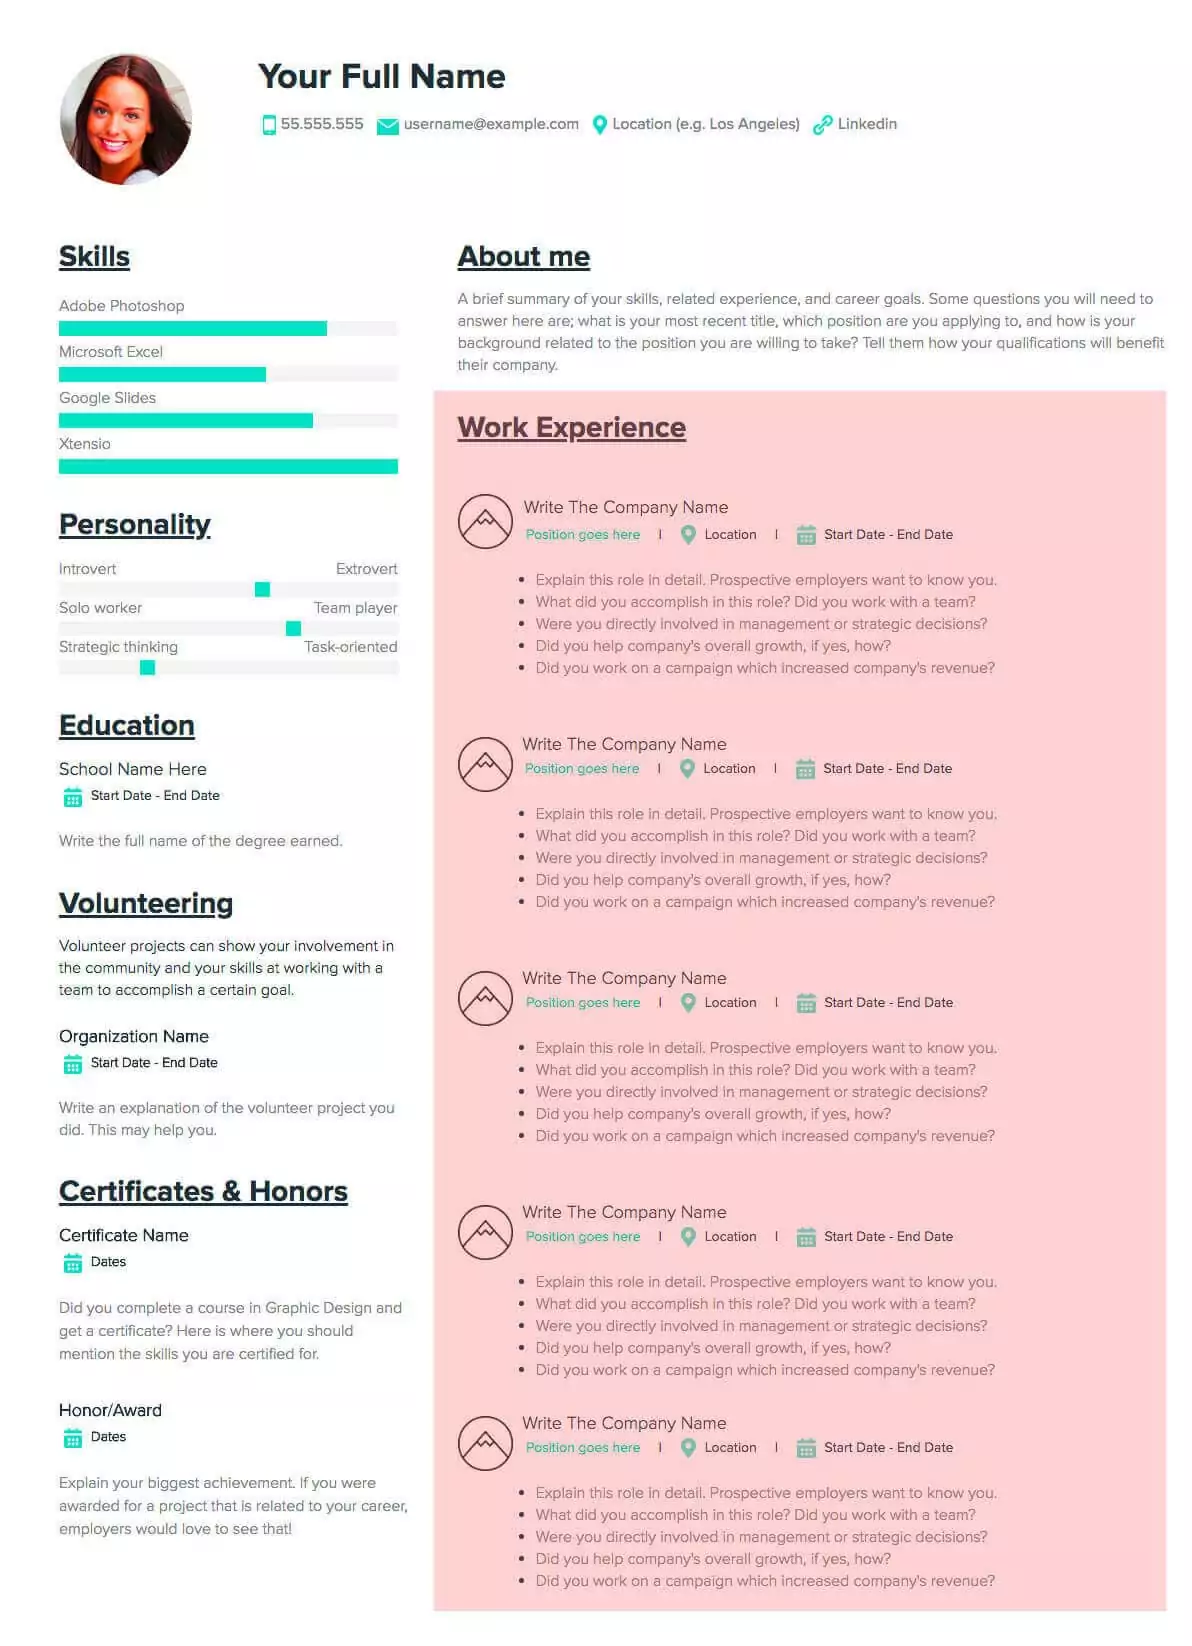 How To Make A Resume, Work Experience